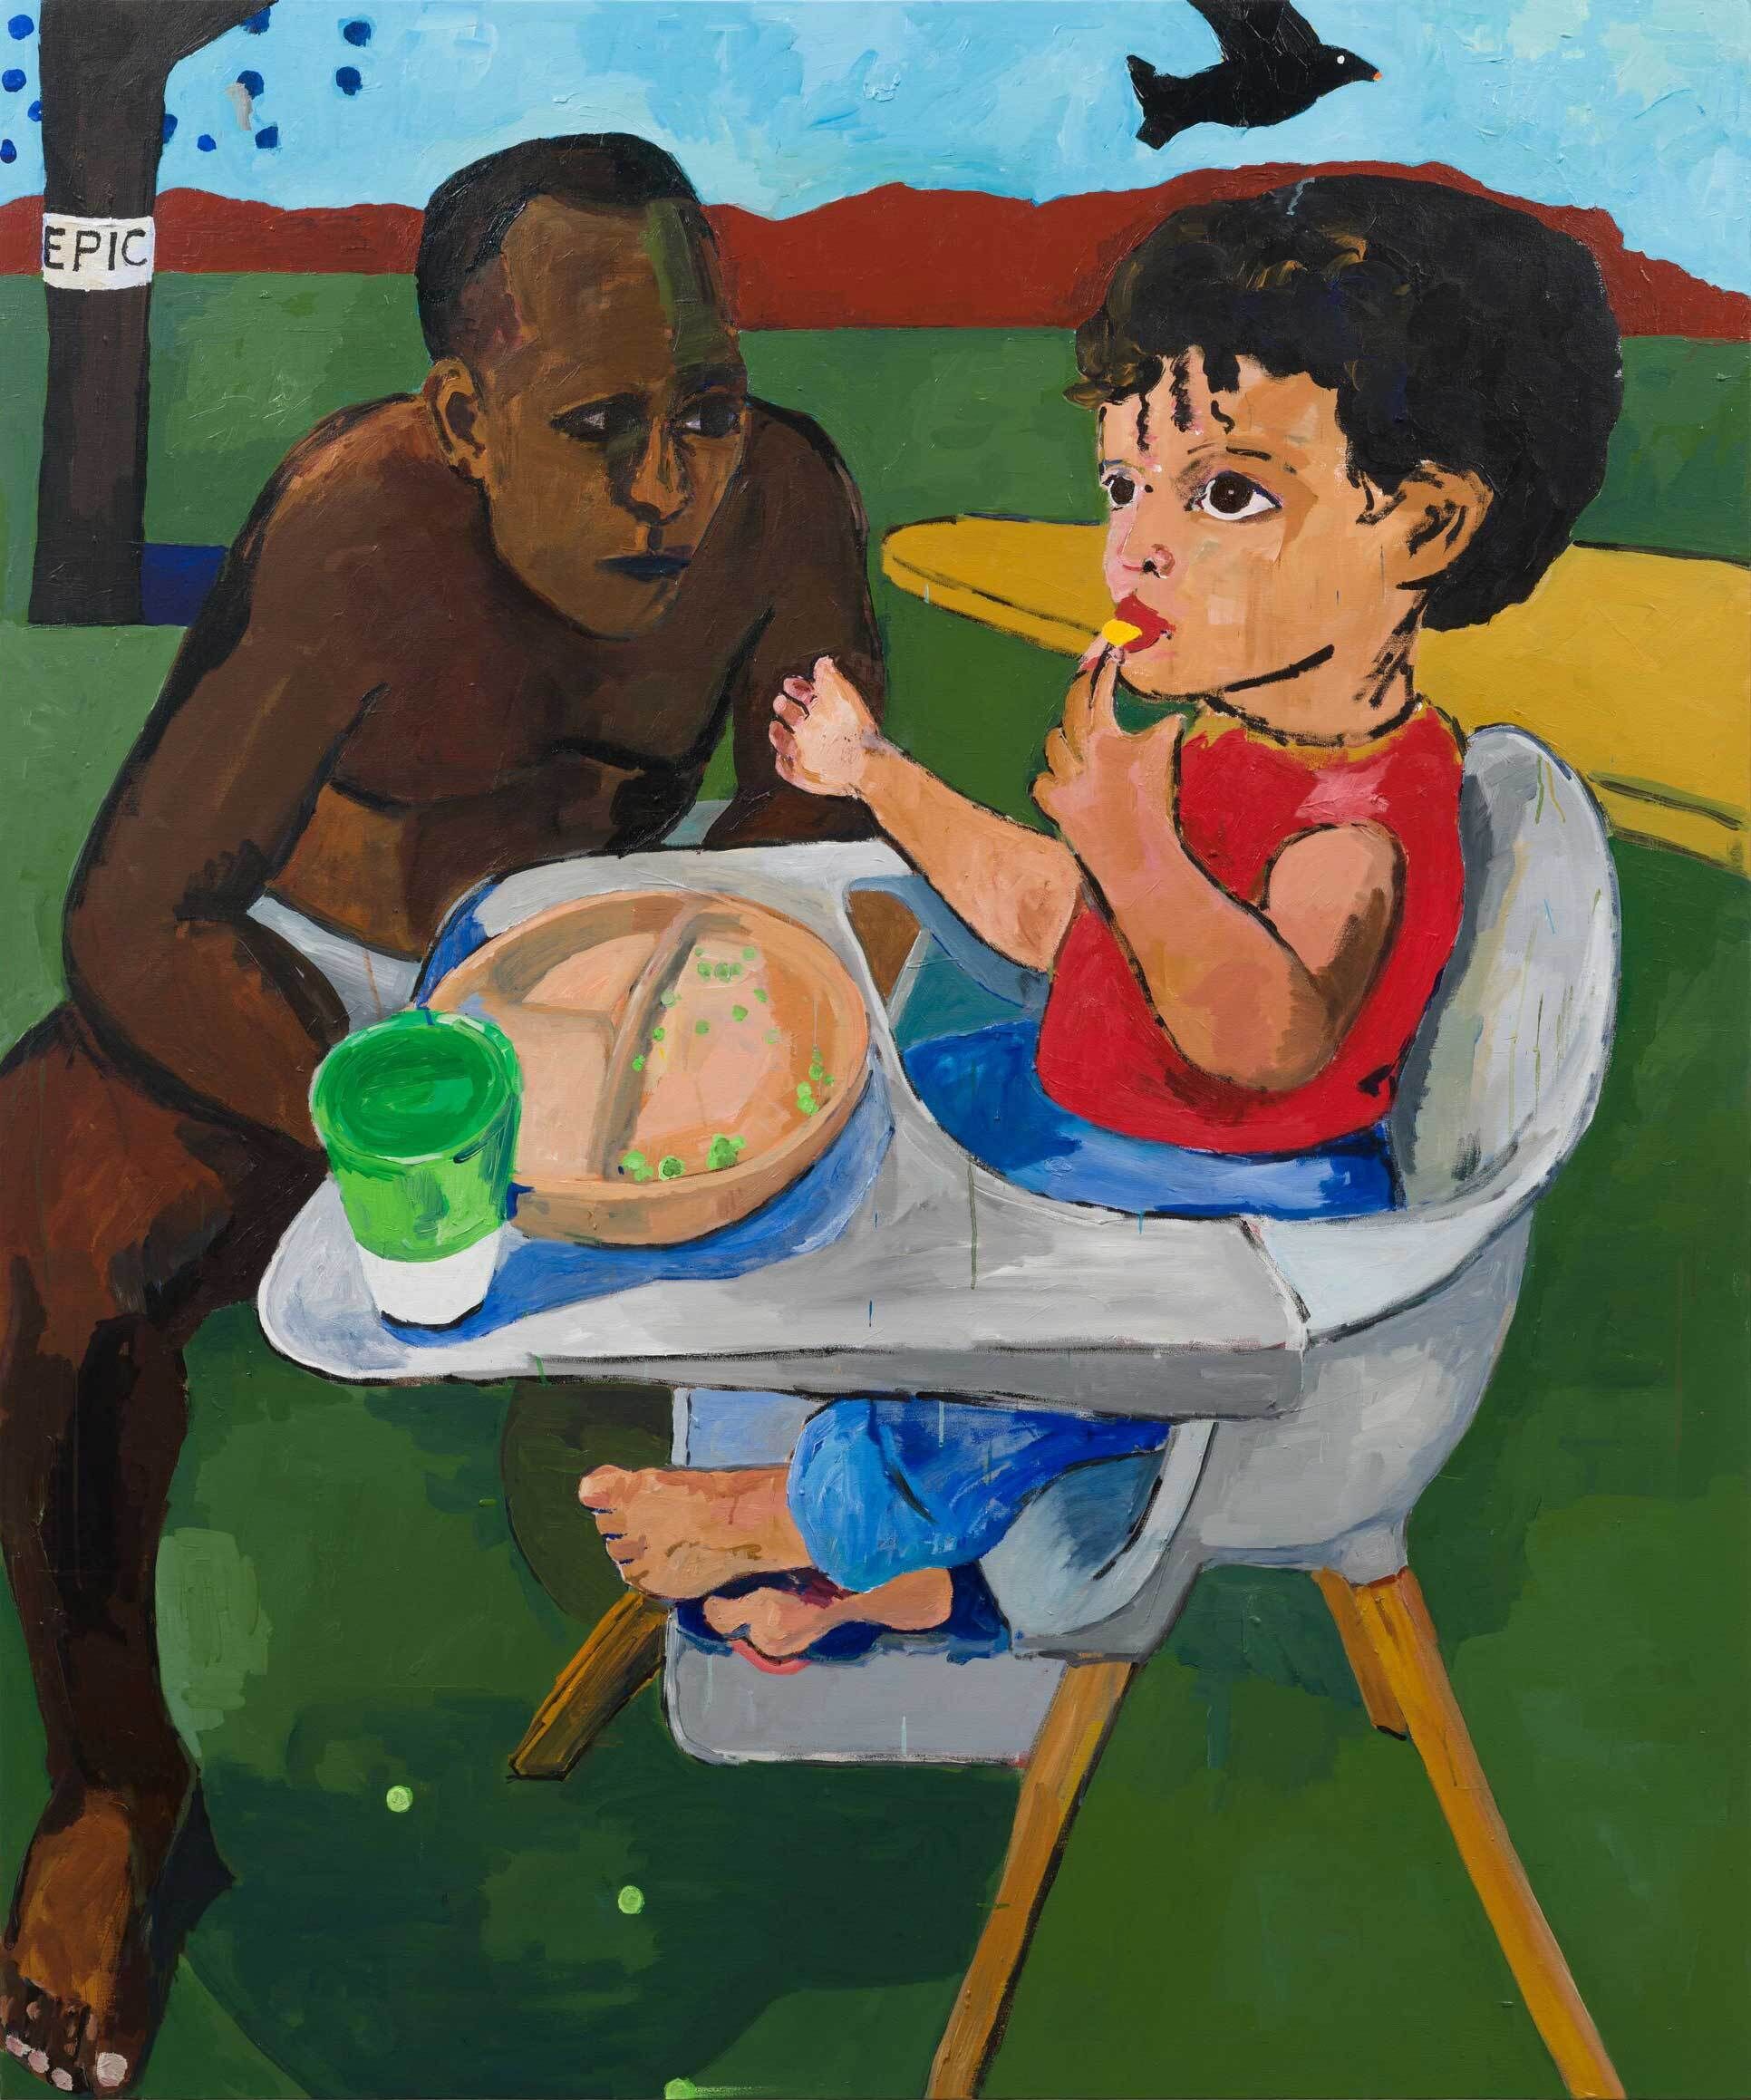 A child sits in a white high chair, eating peas. To the left of her, a Black man is looks after her, squatting. They are in a grassy area, with reddish mountains visible on the horizon and a pale blue sky overhead. Posted on a tree trunk behind them is a white sign with the word "EPIC" in black writing. A black bird flies over the child's head.